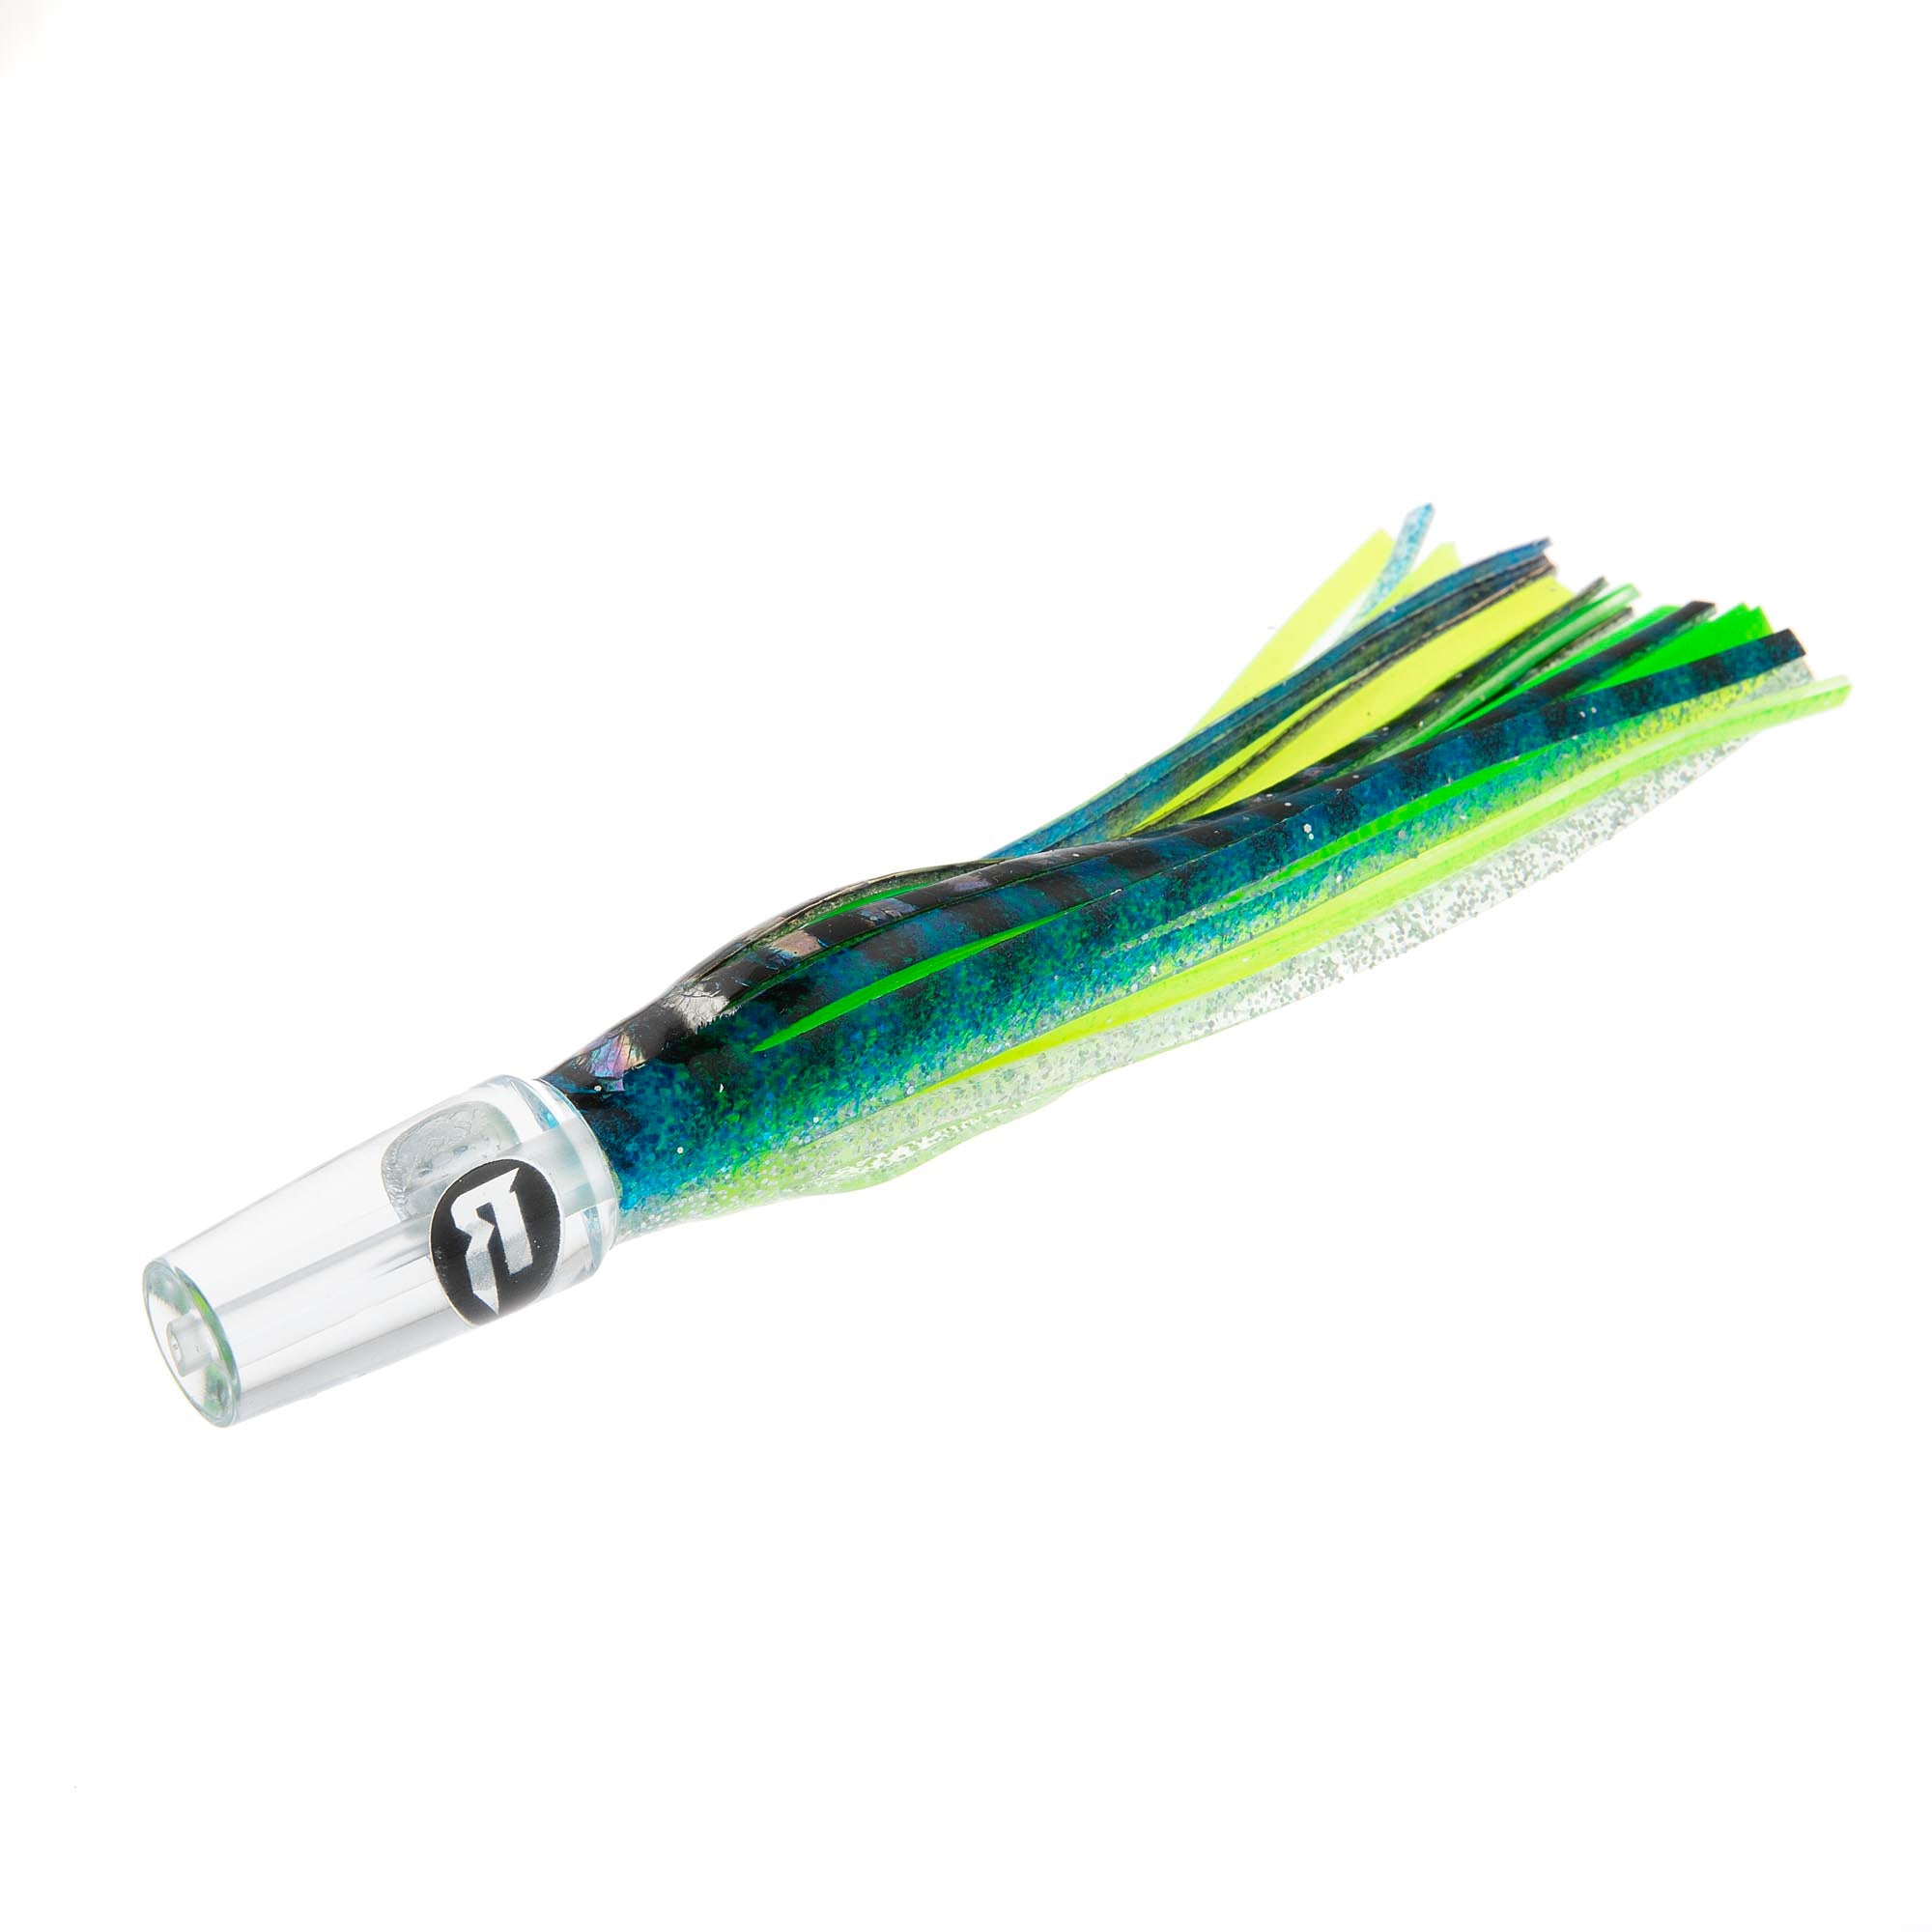 The Hockzhead Pusher - Richter Lures